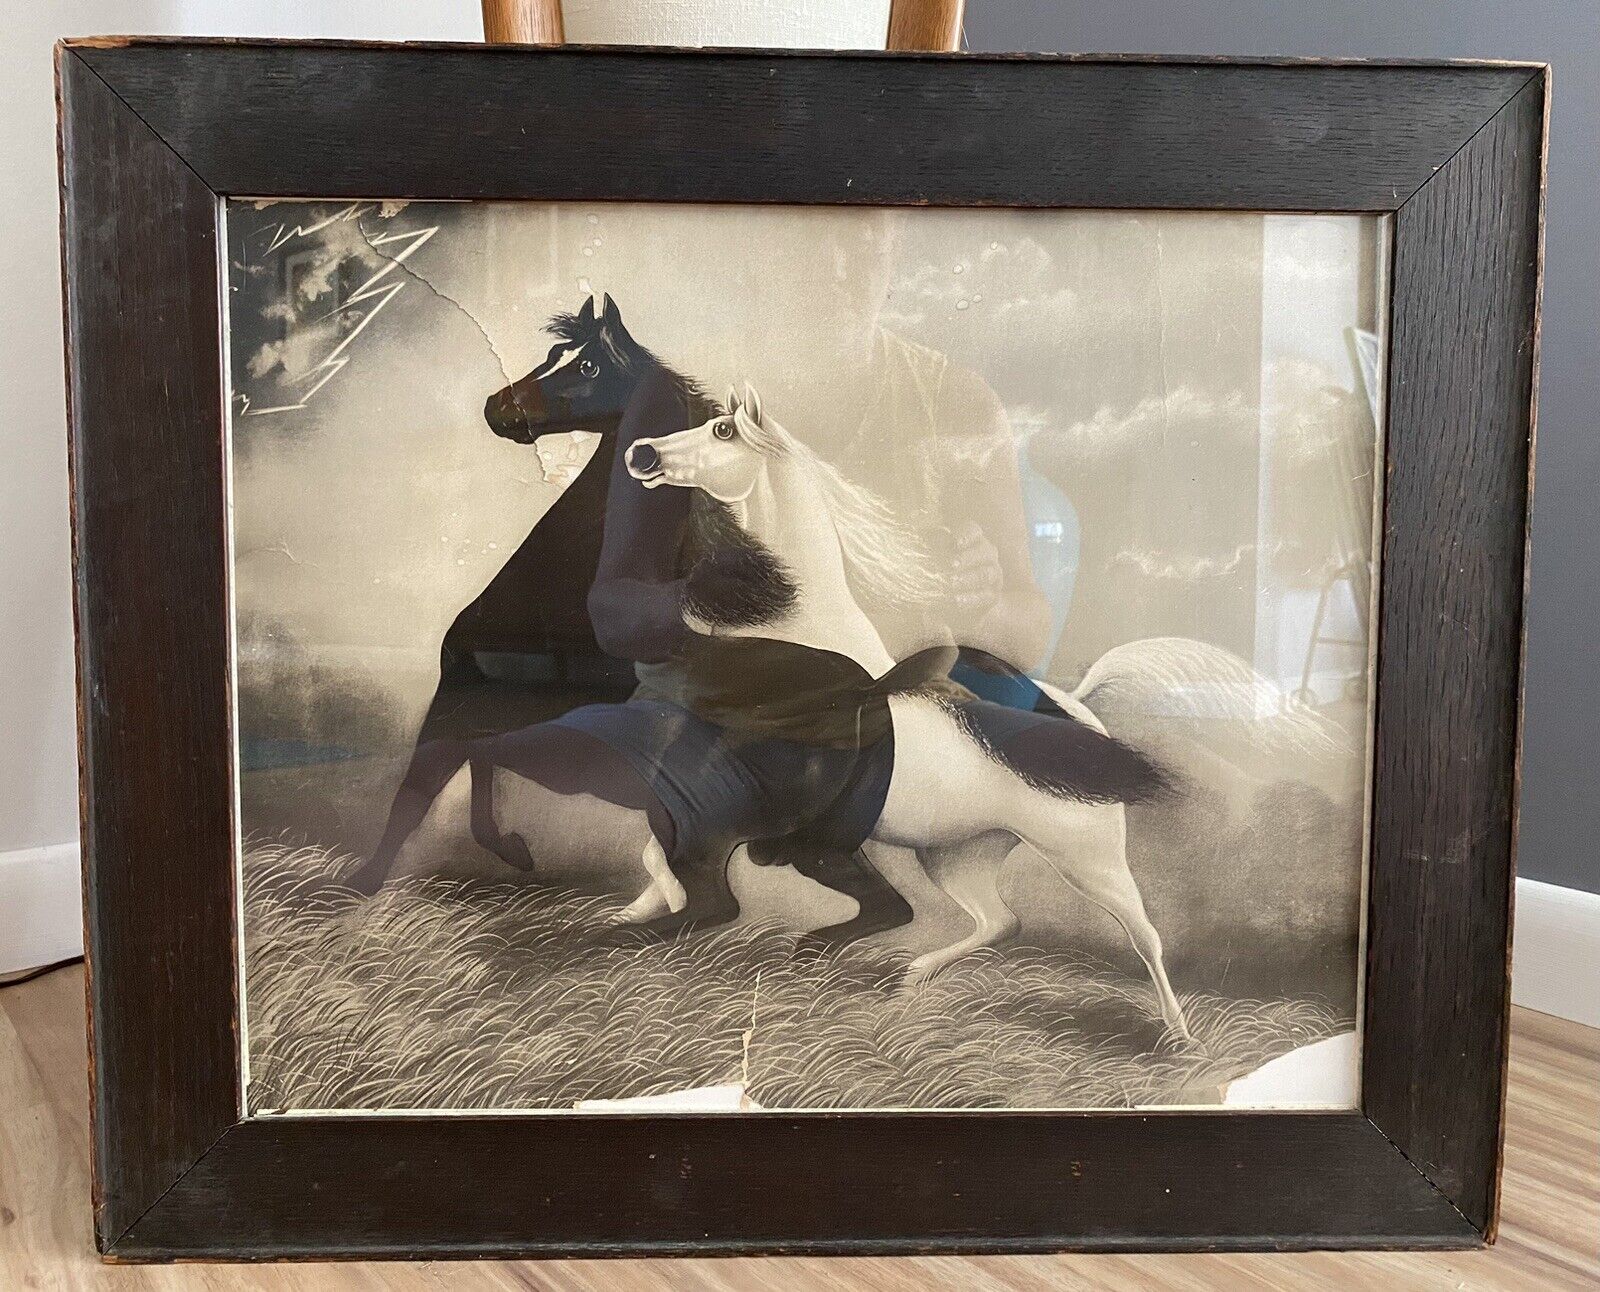 Antique Framed Black Beauty Picture. 24x20” Leroy